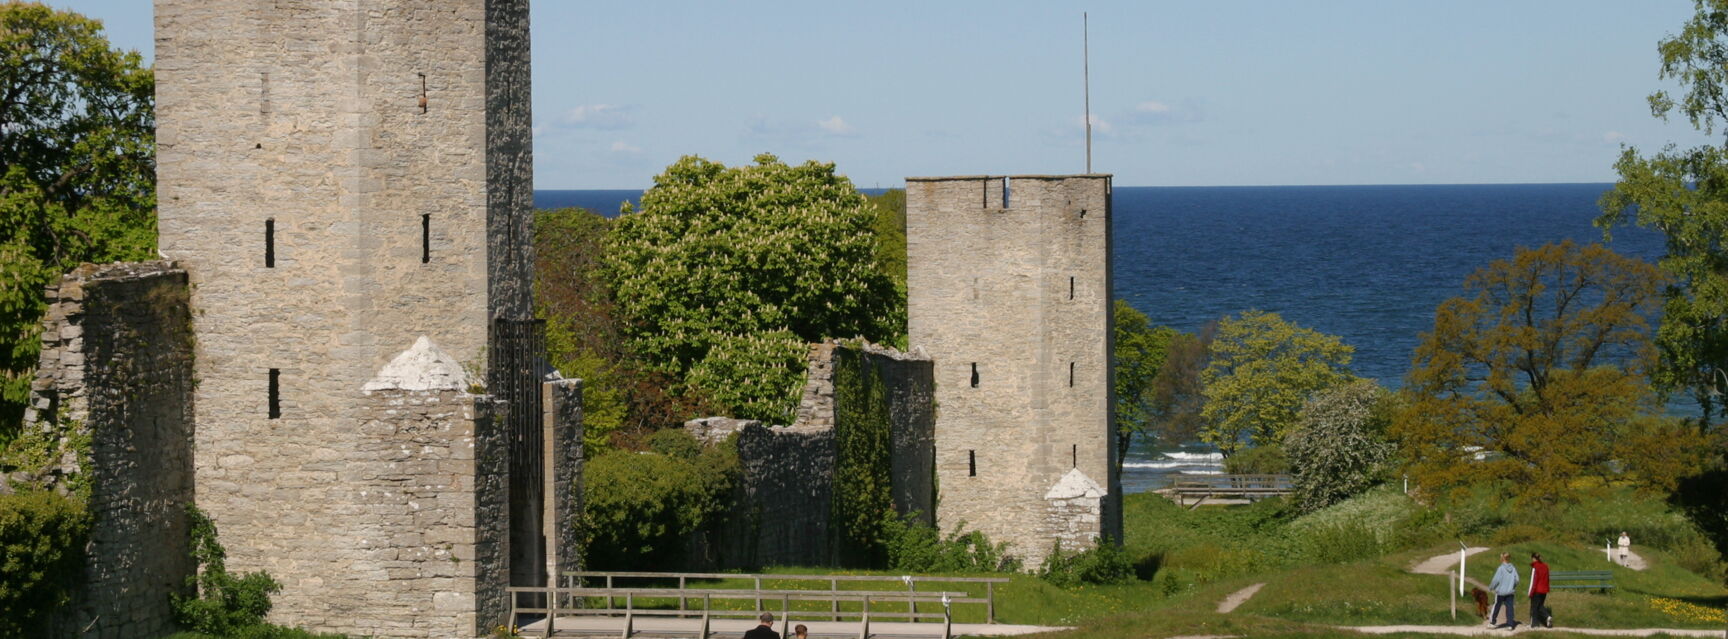 Visby town wall 2